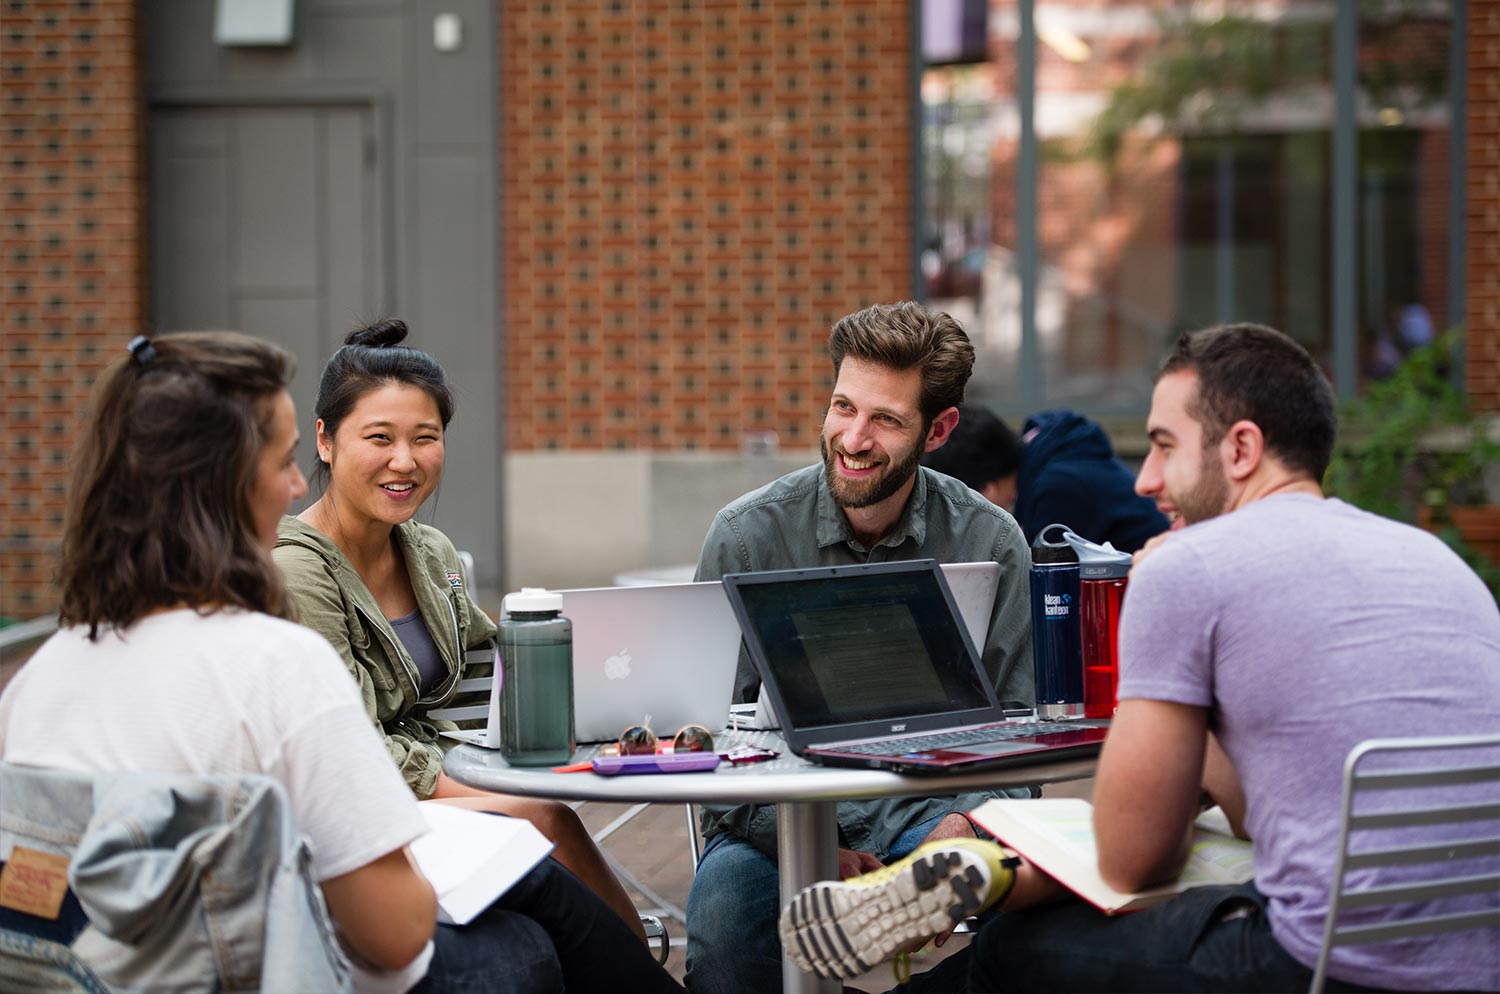 A group of students meeting on an outdoor patio